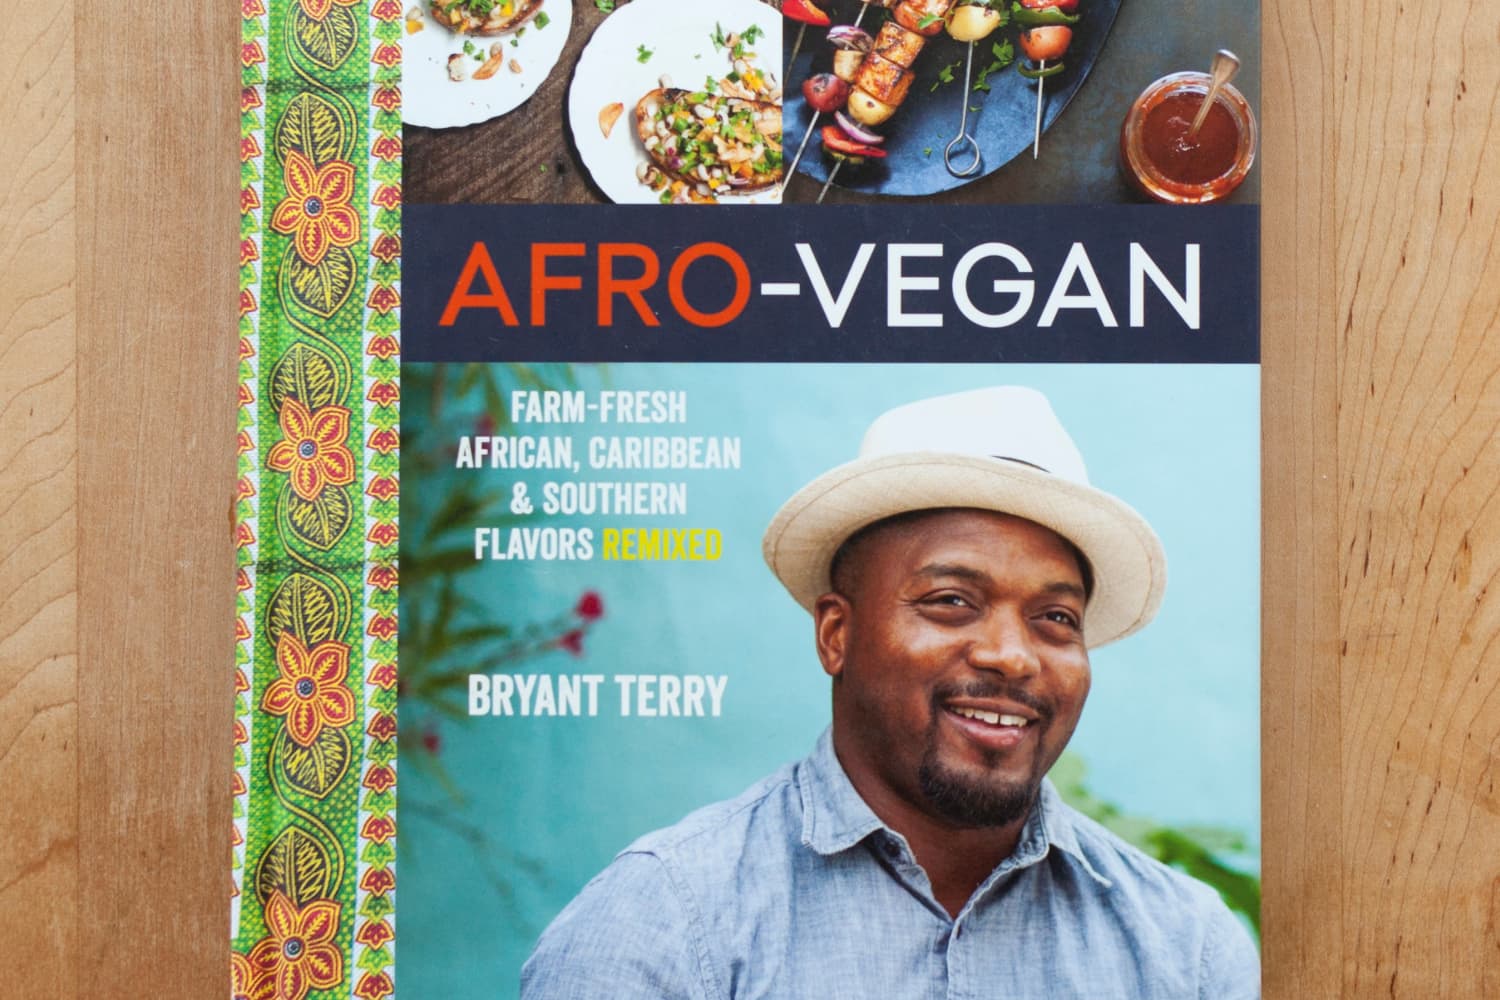 Afro-Vegan by Bryant Terry | The Kitchn